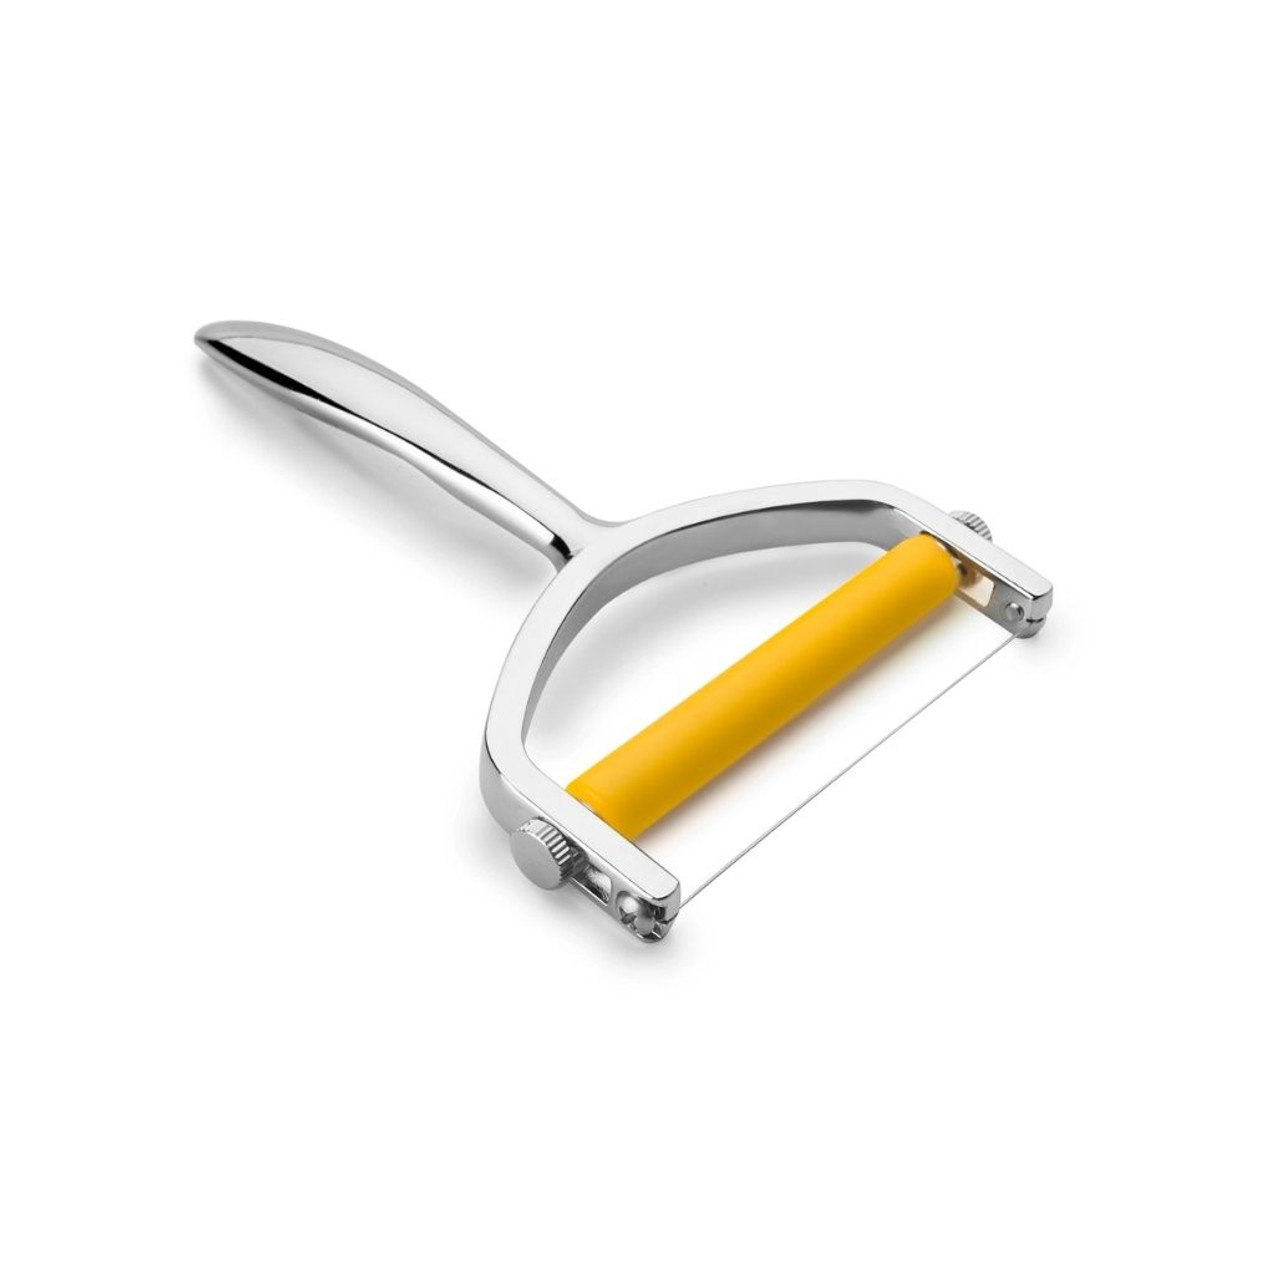 https://cdn11.bigcommerce.com/s-6yfyhv23lh/images/stencil/1280x1280/products/532/1975/wire-cheese-slicer-2__57711.1650645895.jpg?c=1